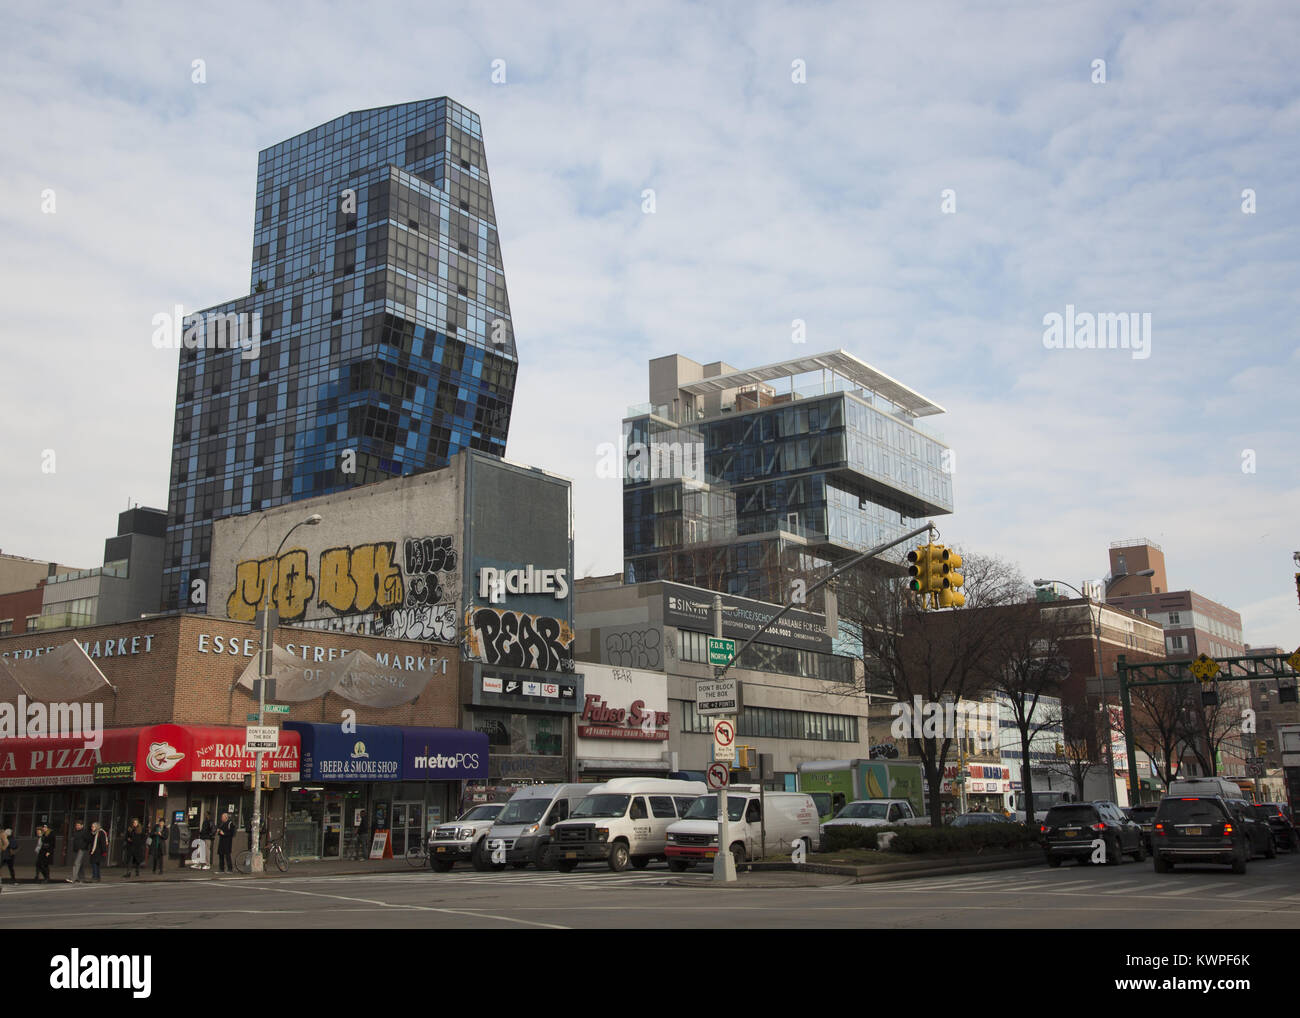 The changing face of the Lower East Side as seen from the corner of Delancey and Essex streets in Manhattan, New York City. The now famous Bernard Tschumi’s  residential blue building at Norfolk and Delancey Streets shoots up in the background. Stock Photo